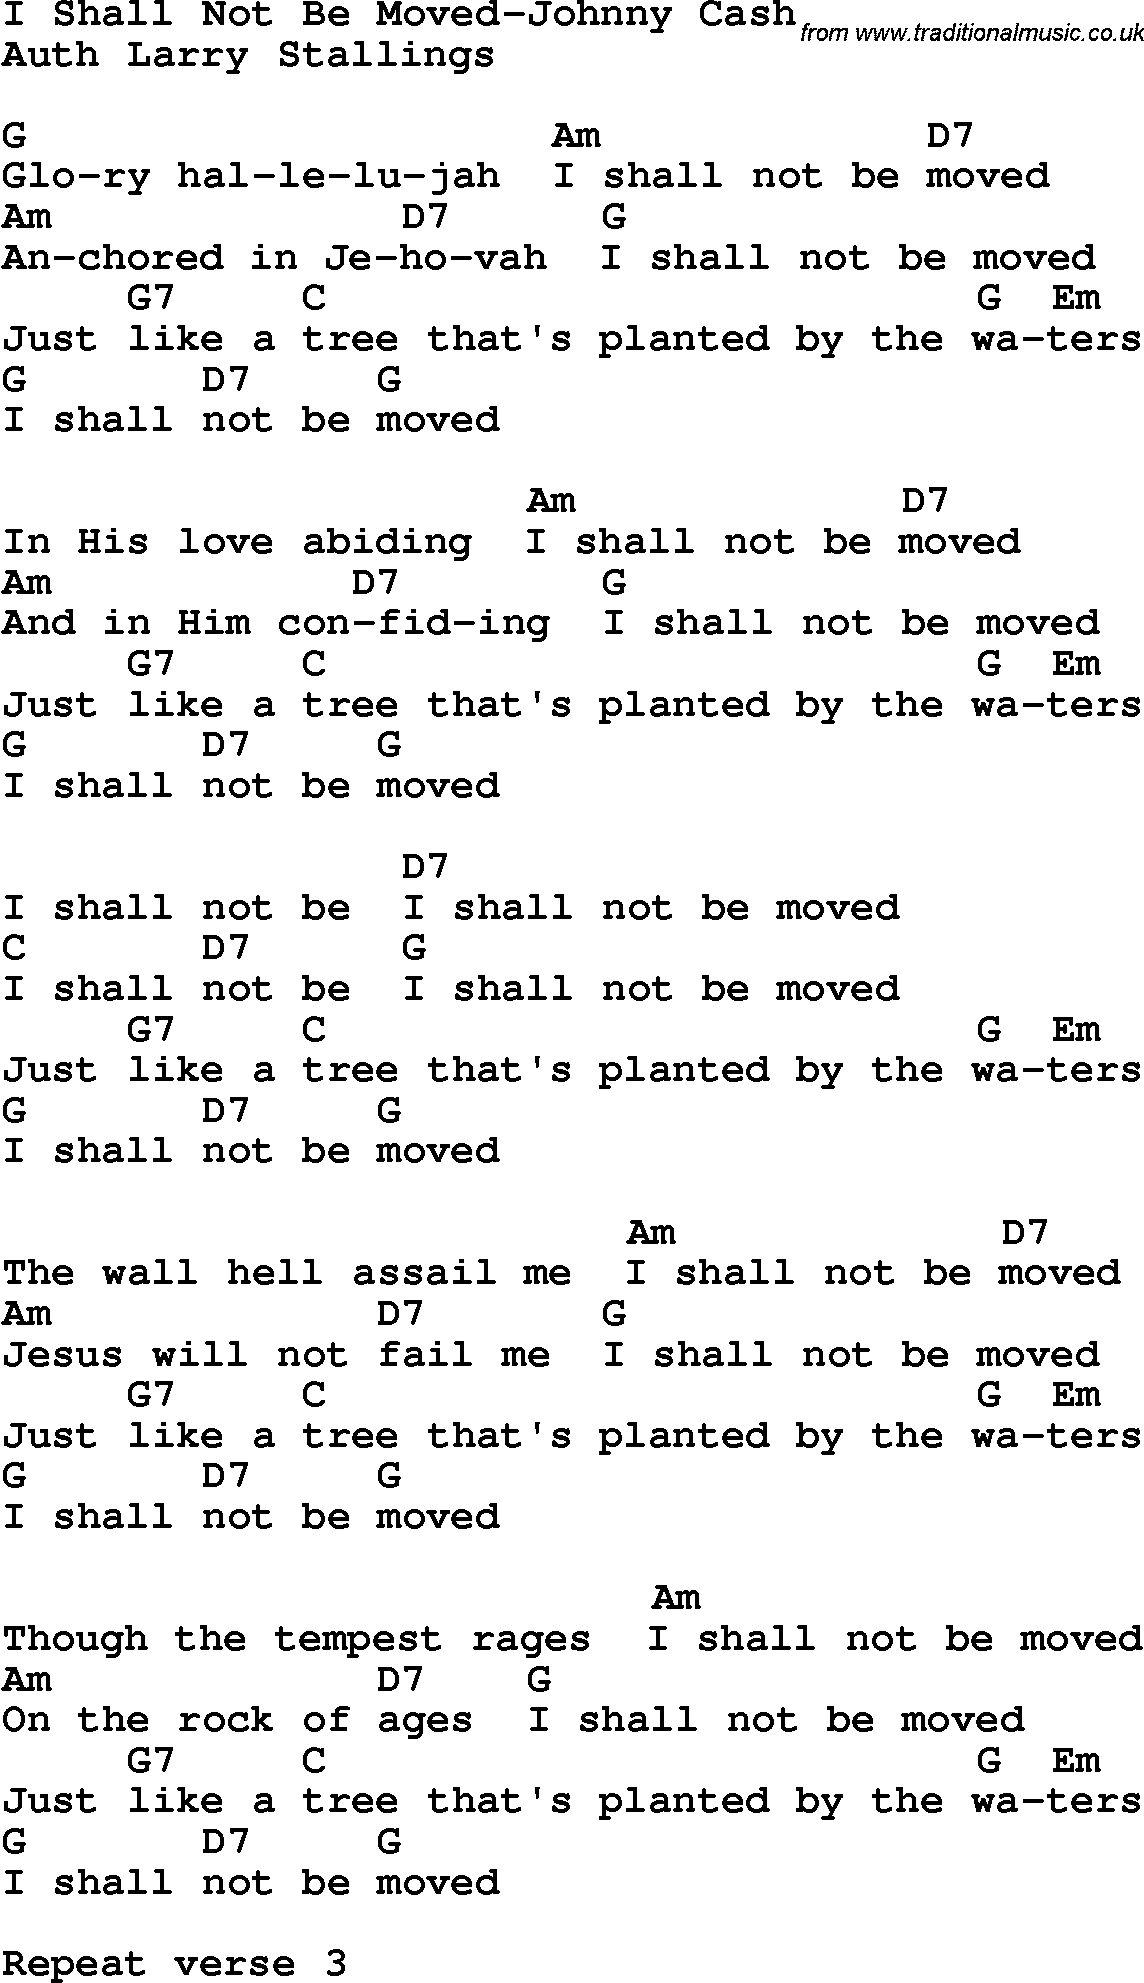 Country, Southern and Bluegrass Gospel Song I Shall Not Be Moved-Johnny Cash lyrics and chords